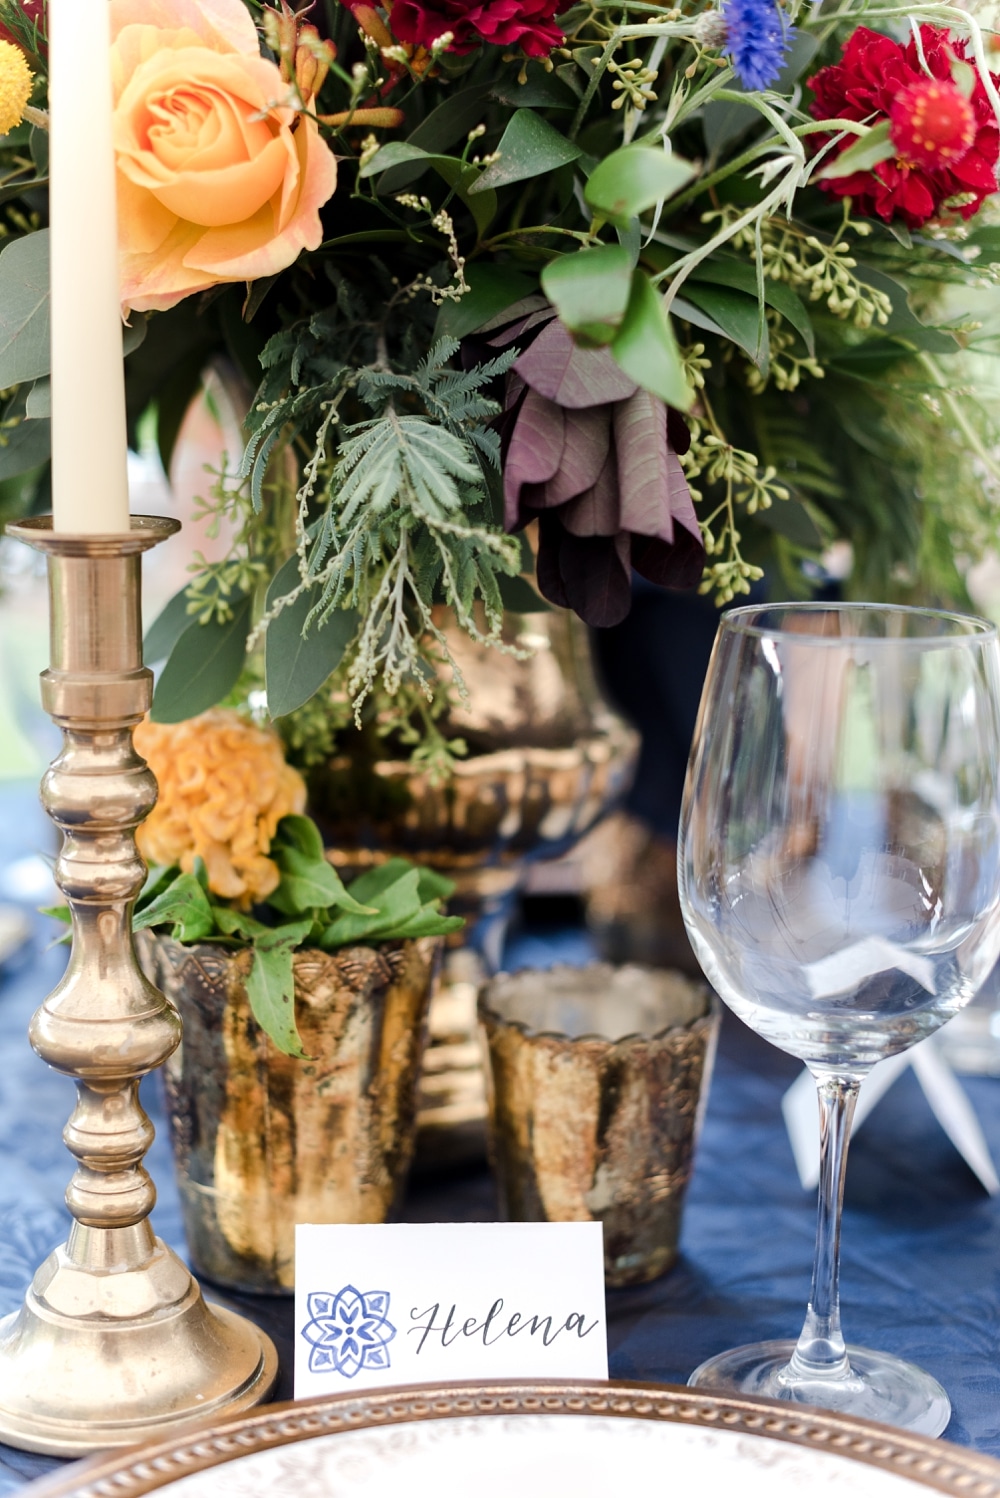 Florals table setting and styling by Good Earth Flowers